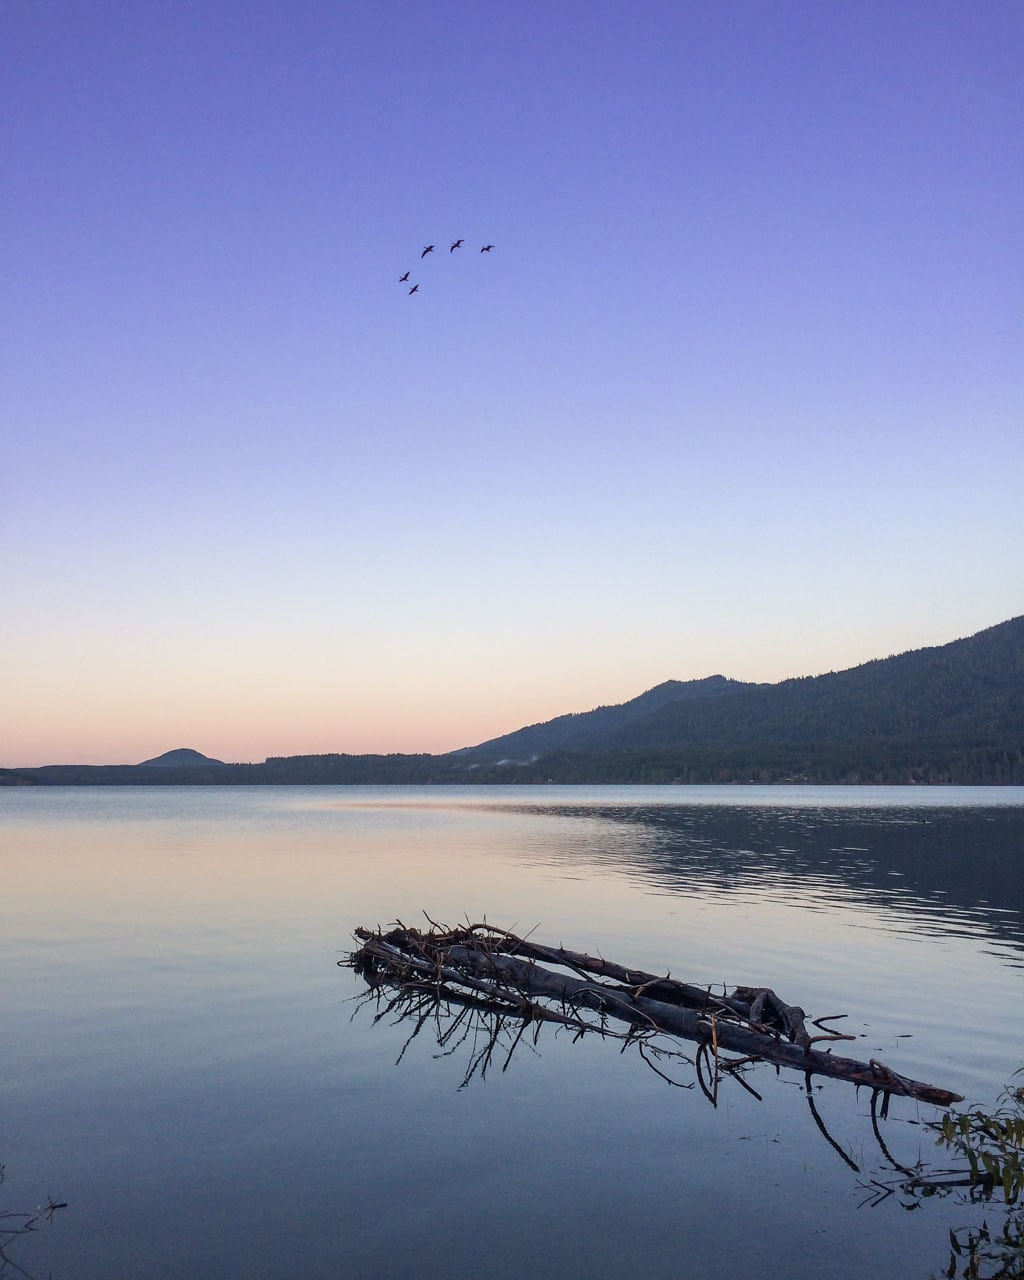 Canada geese flying over Lake Quinault, Olympic National Park, Washington